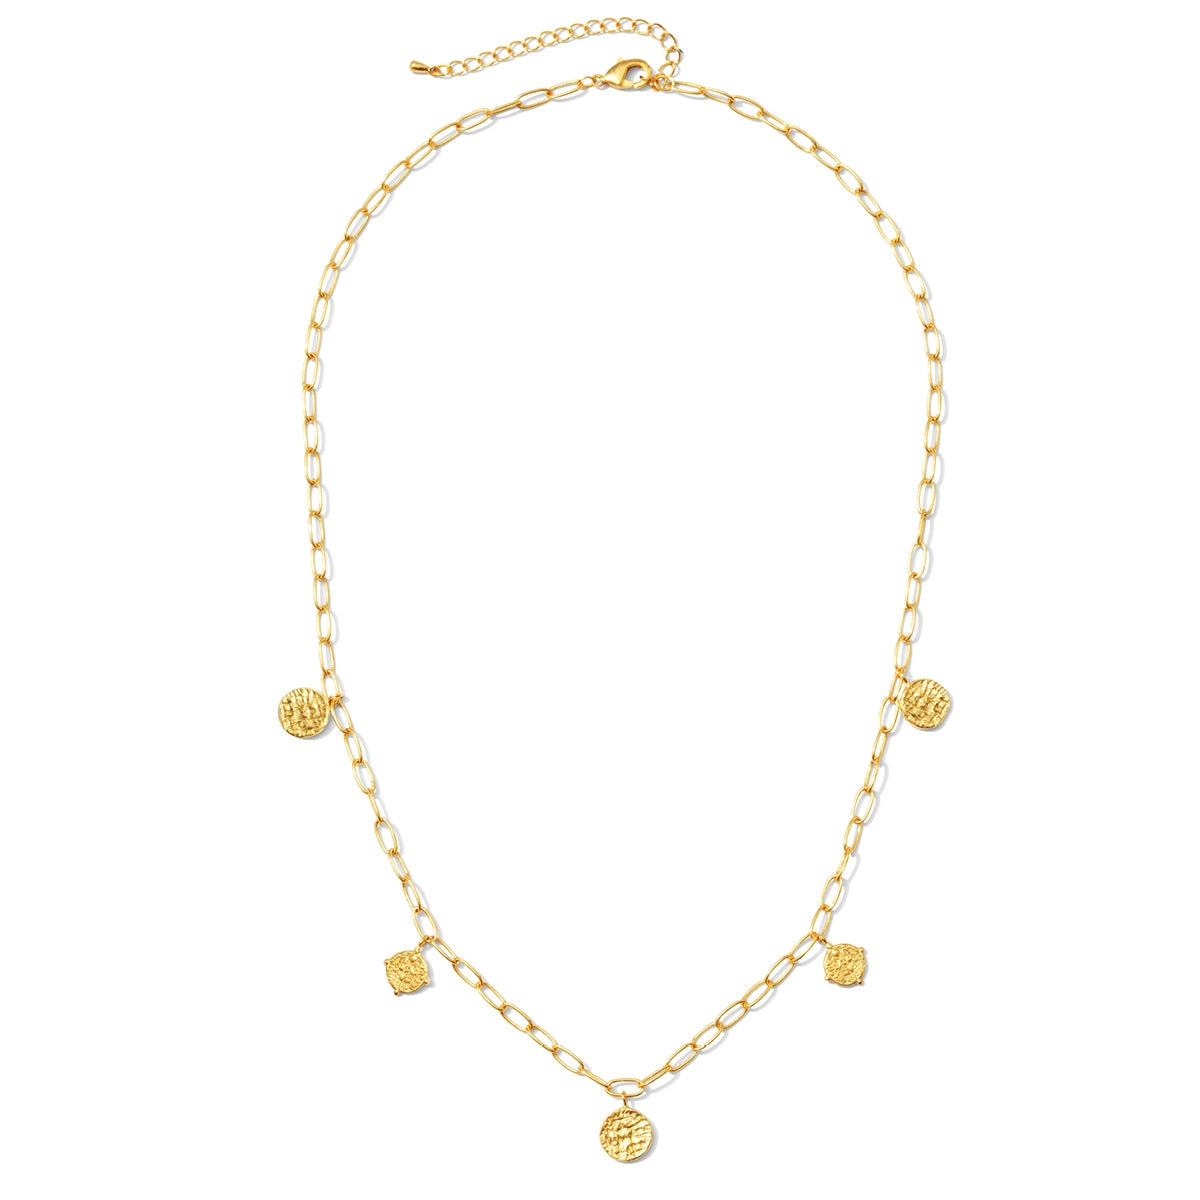 Gold Textured Medallion Link Chain Necklace